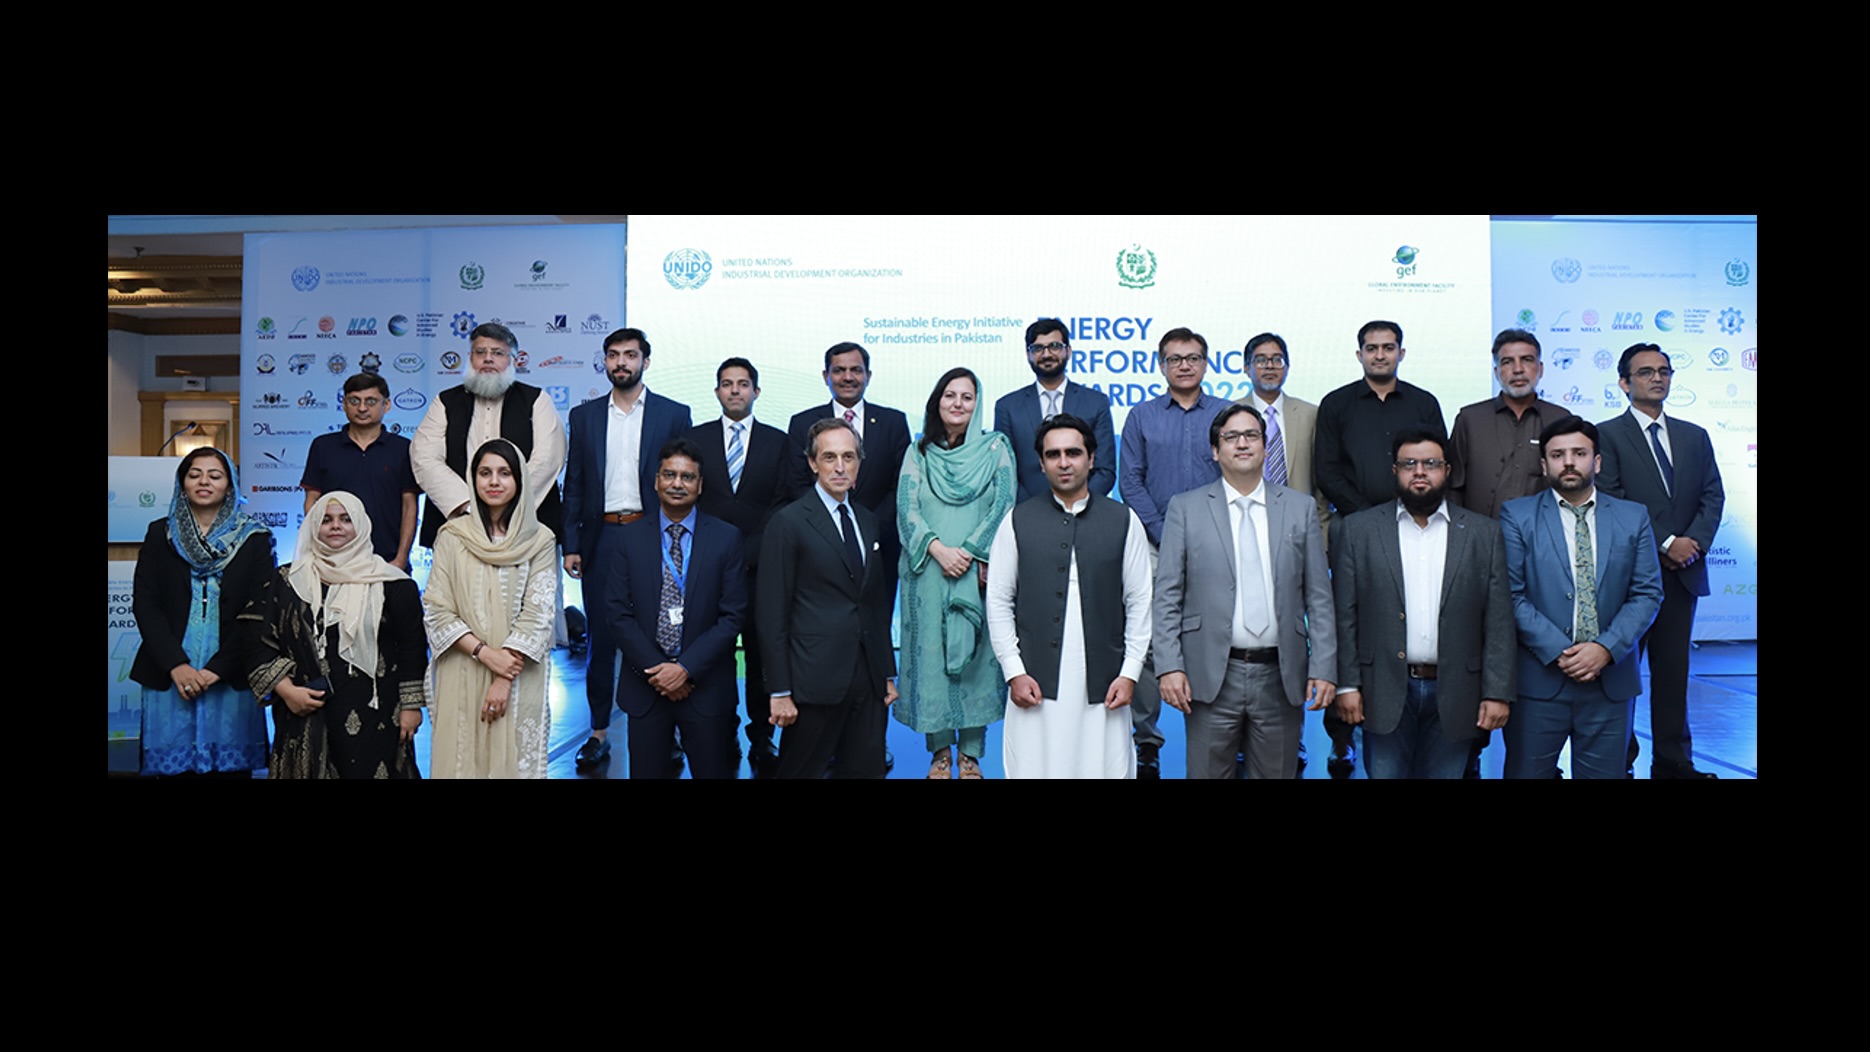 In Pakistan, UNIDO honors high achievers in energy-intensive industries through Energy Performance Awards